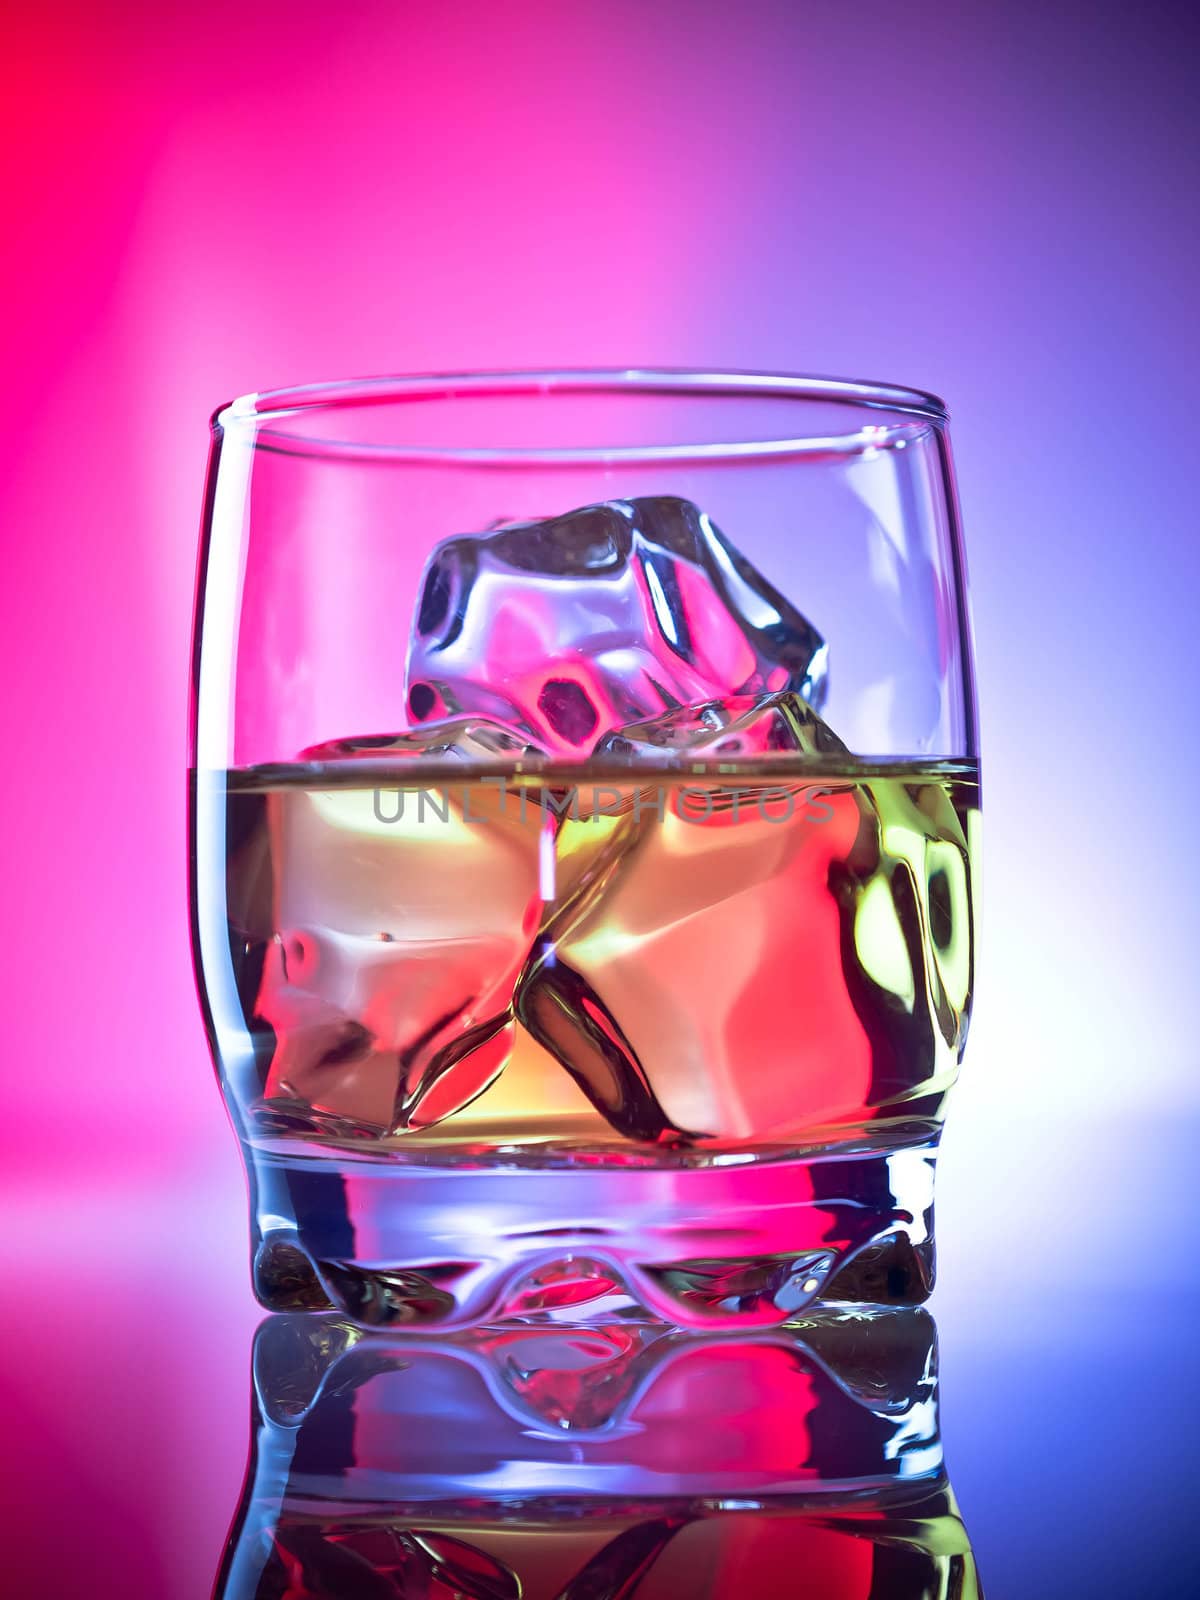 Whiskey on the rocks over vibrant red and blue background